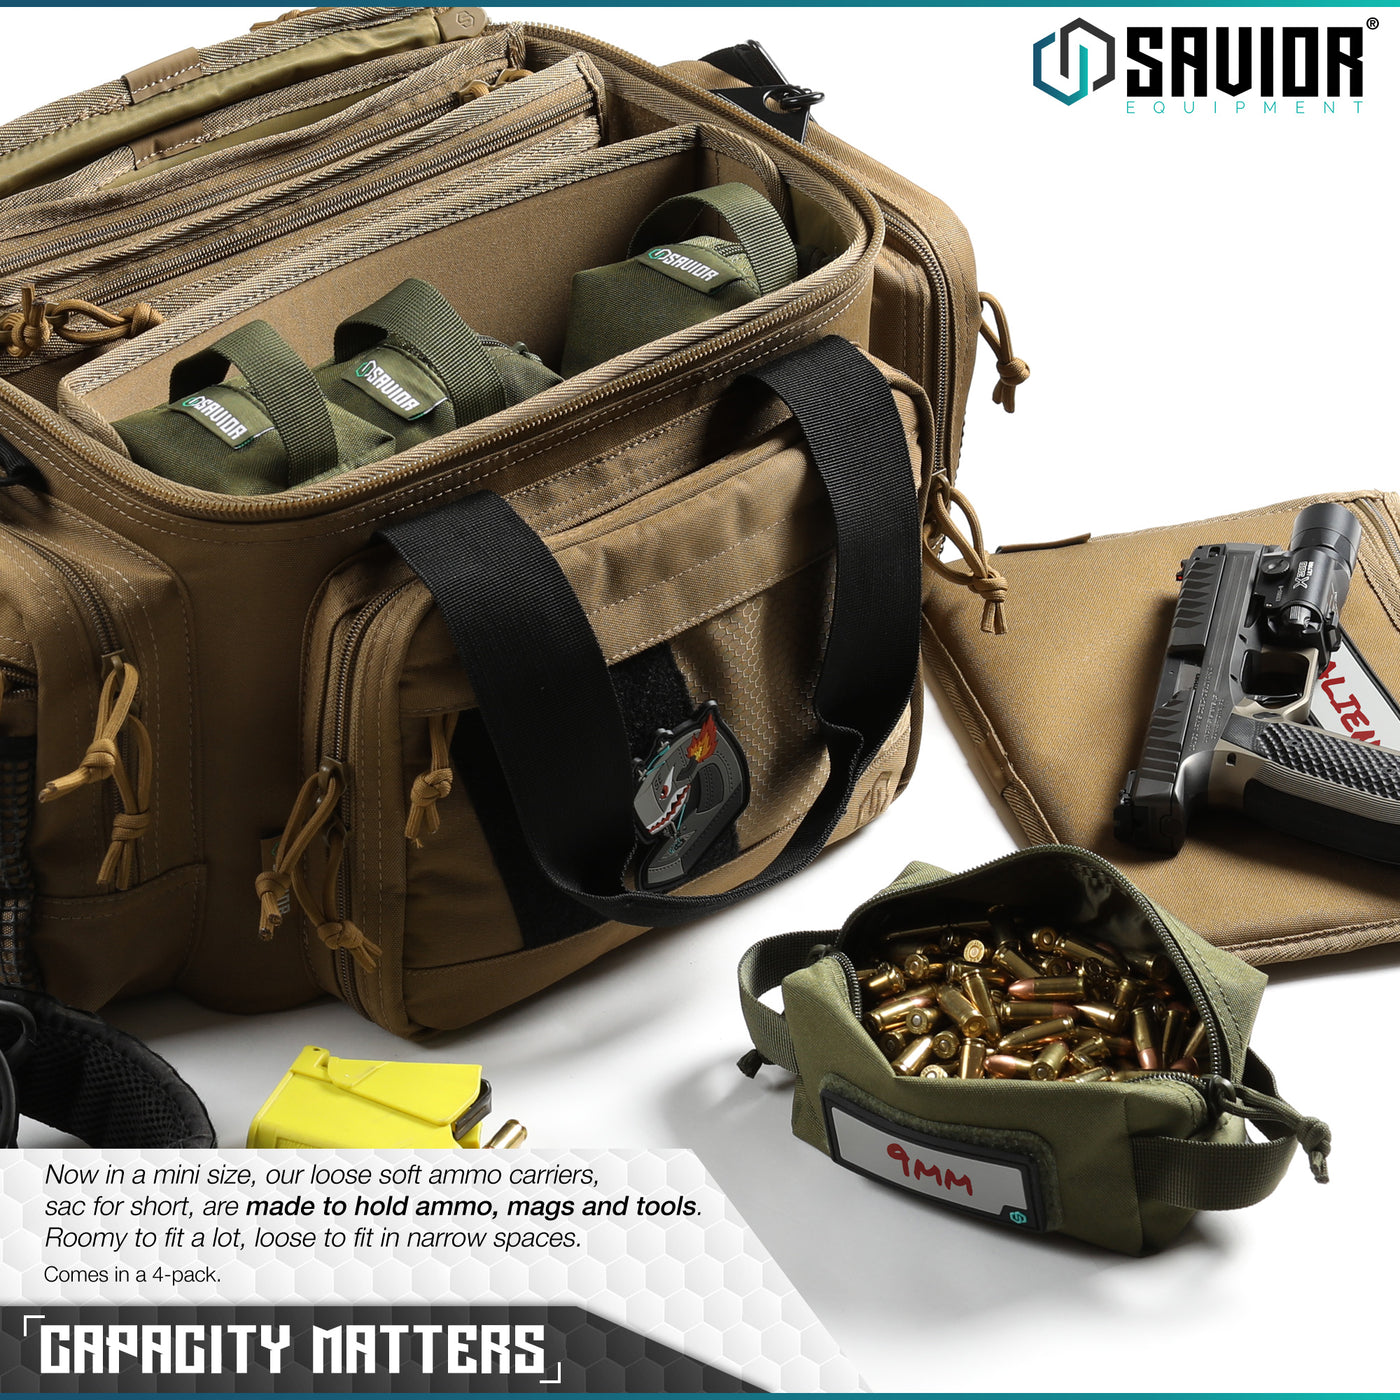 Capacity Matters - Now in a mini size, our loose soft ammo carriers, sac for short, are made to hold ammo, mags and tools. Roomy to fit a lot, loose to fit in narrow spaces. Comes in a 4 pack.